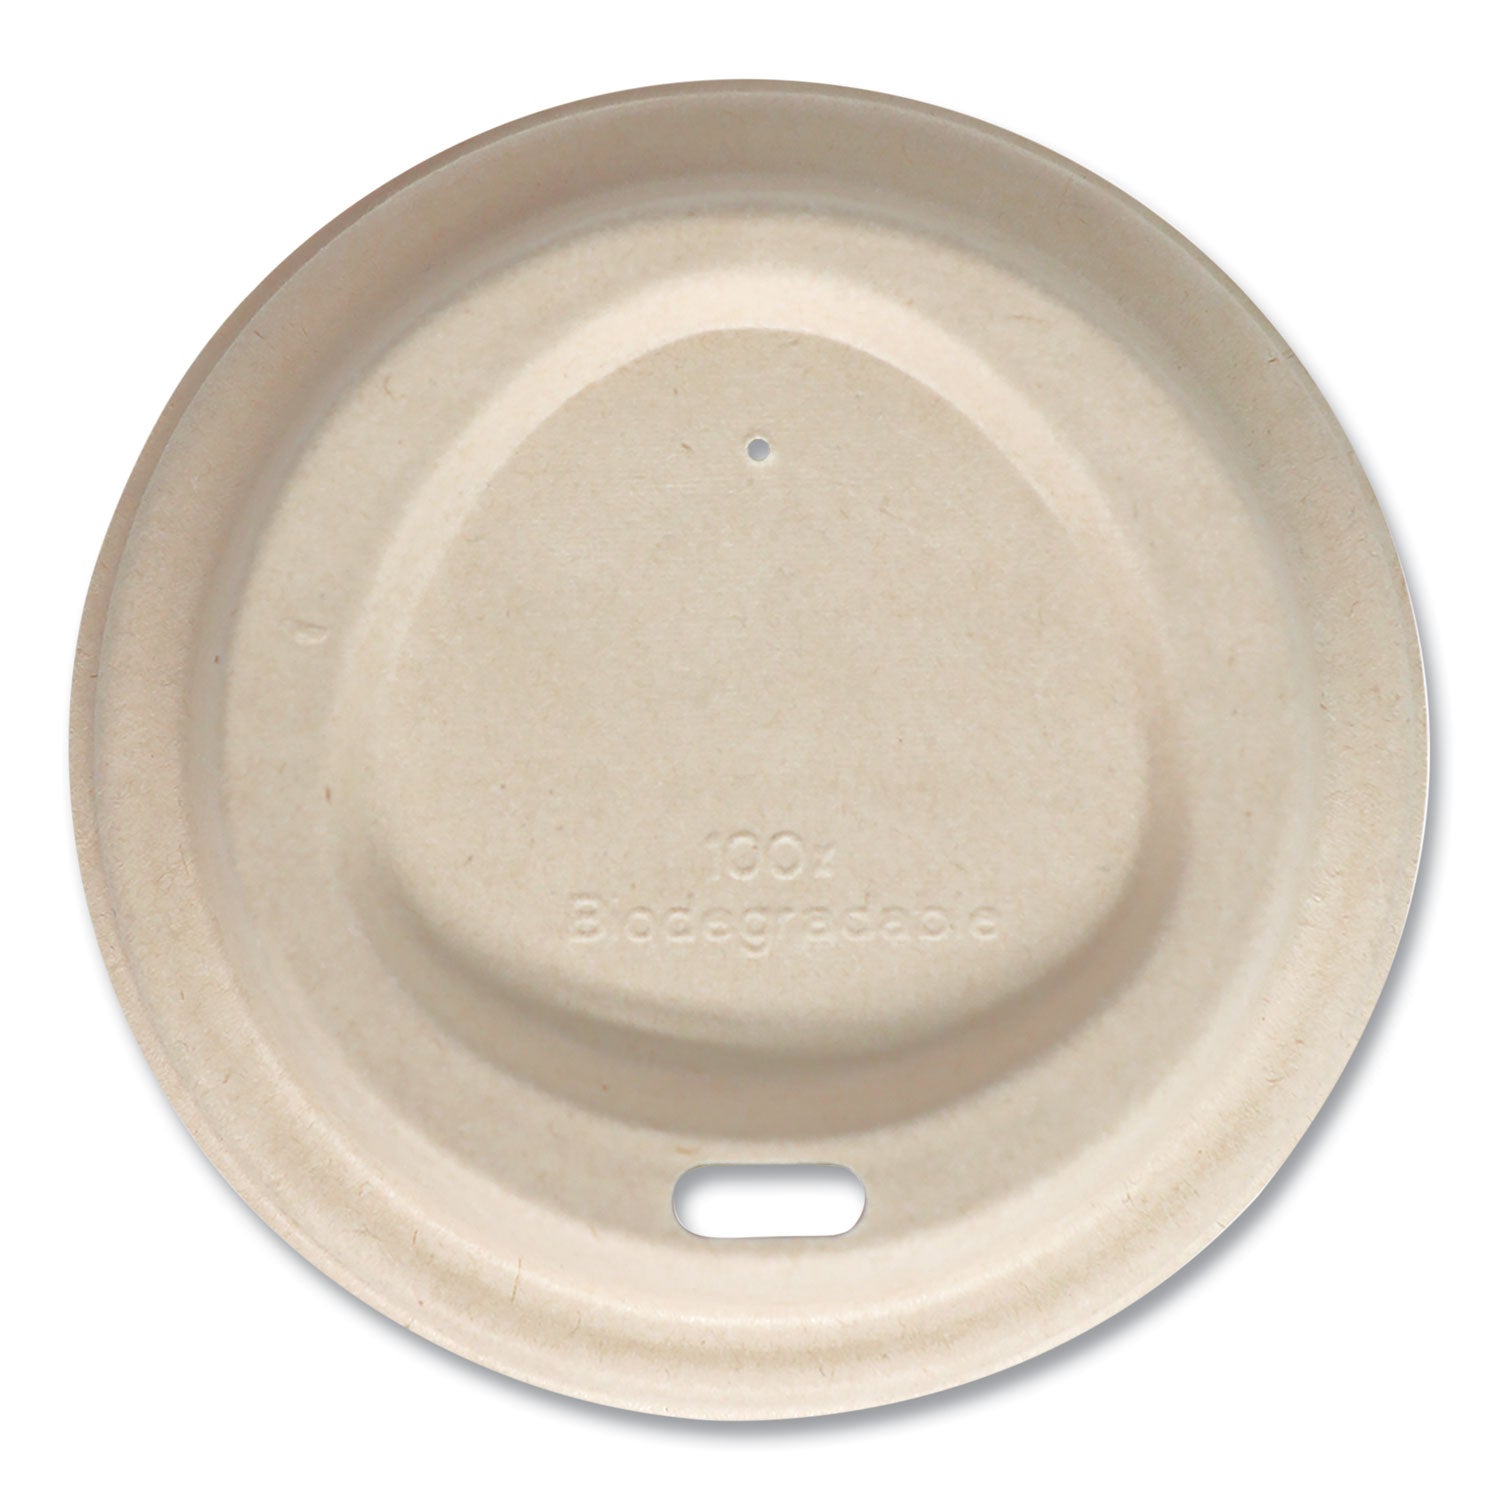 fiber-lids-for-cups-fits-10-oz-to-20-oz-cups-natural-1000-carton_worculfb12lf - 1